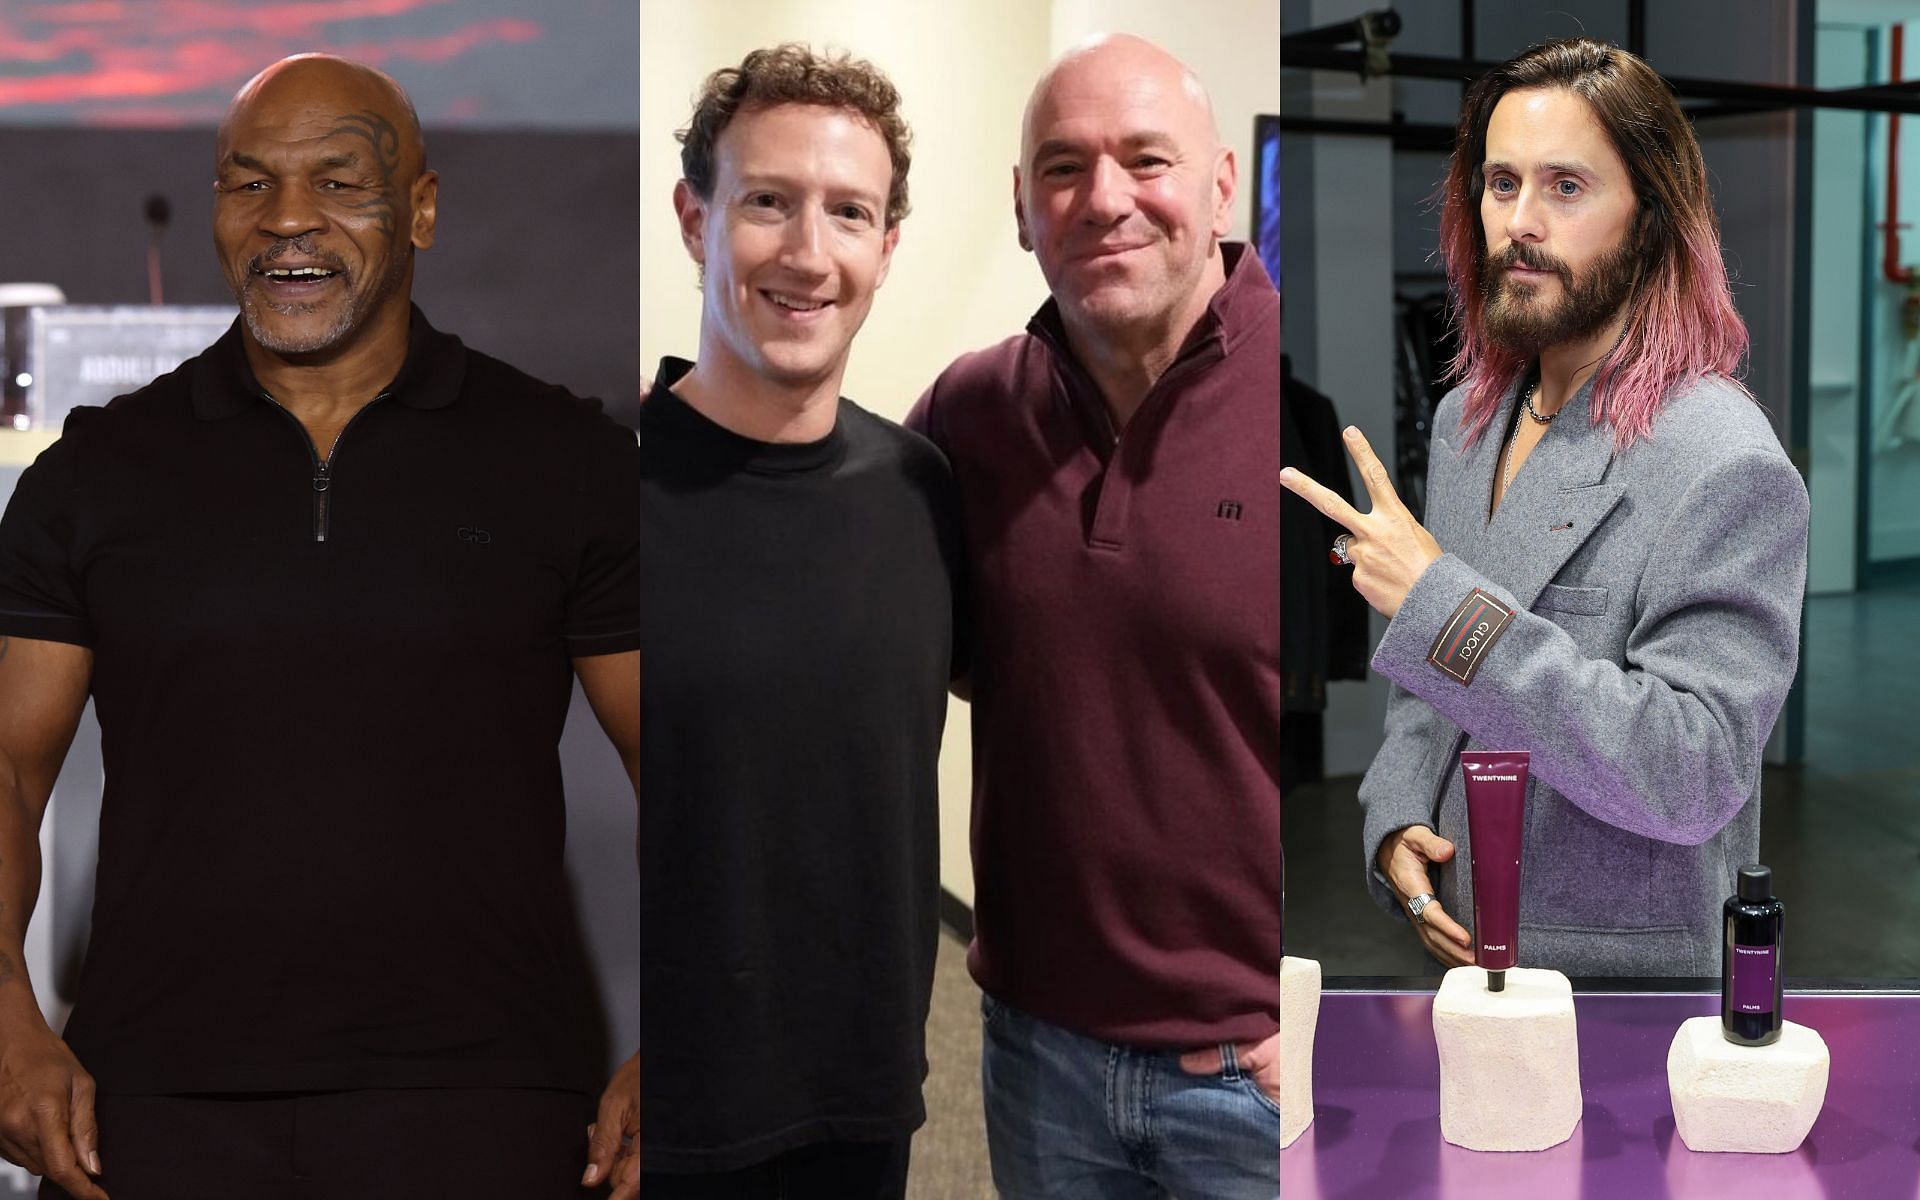 Mike Tyson (left), Mark Zuckerberg and Dana White (middle), and Jared Leto (right) were at the T-Mobile Arena in Las Vegas for UFC 300 [Images courtesy: middle image via @danawhite on Instagram; left and right images via Getty Images]